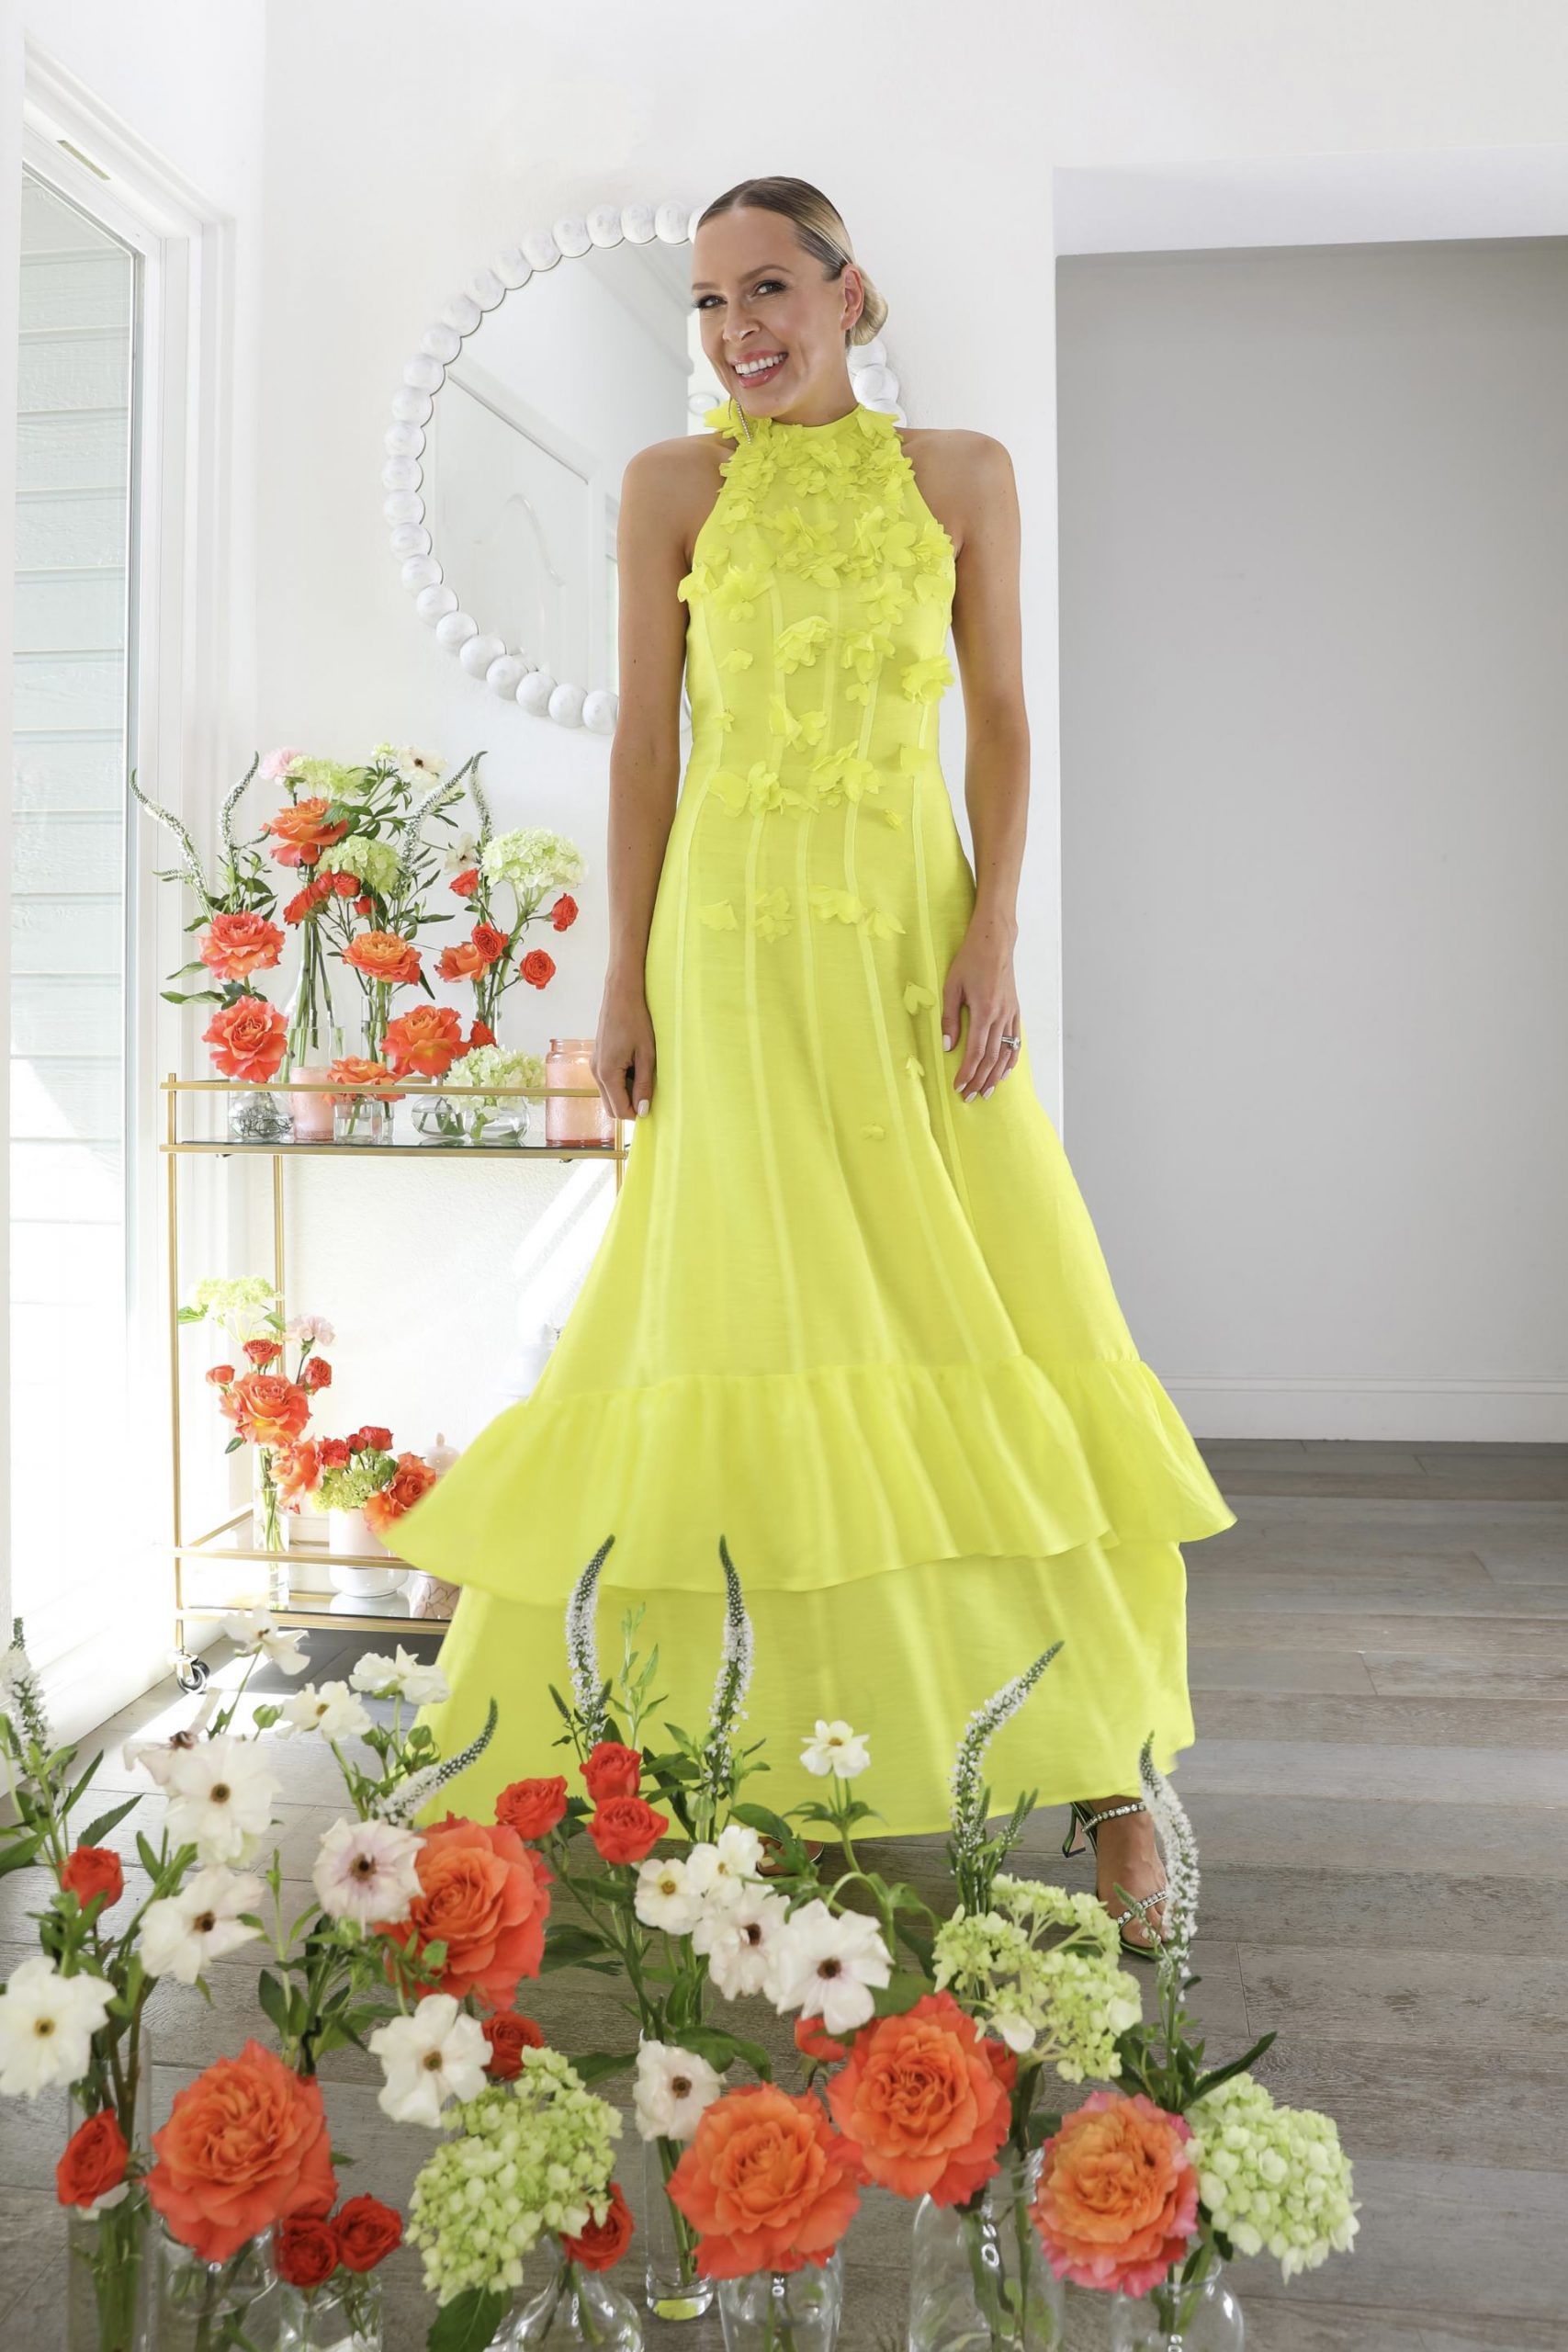 Karen Millen spring summer style featuring colorful dresses in neon, orange and floral print. Floral design inspiration by Veronica Levy, Lombard & Fifth.